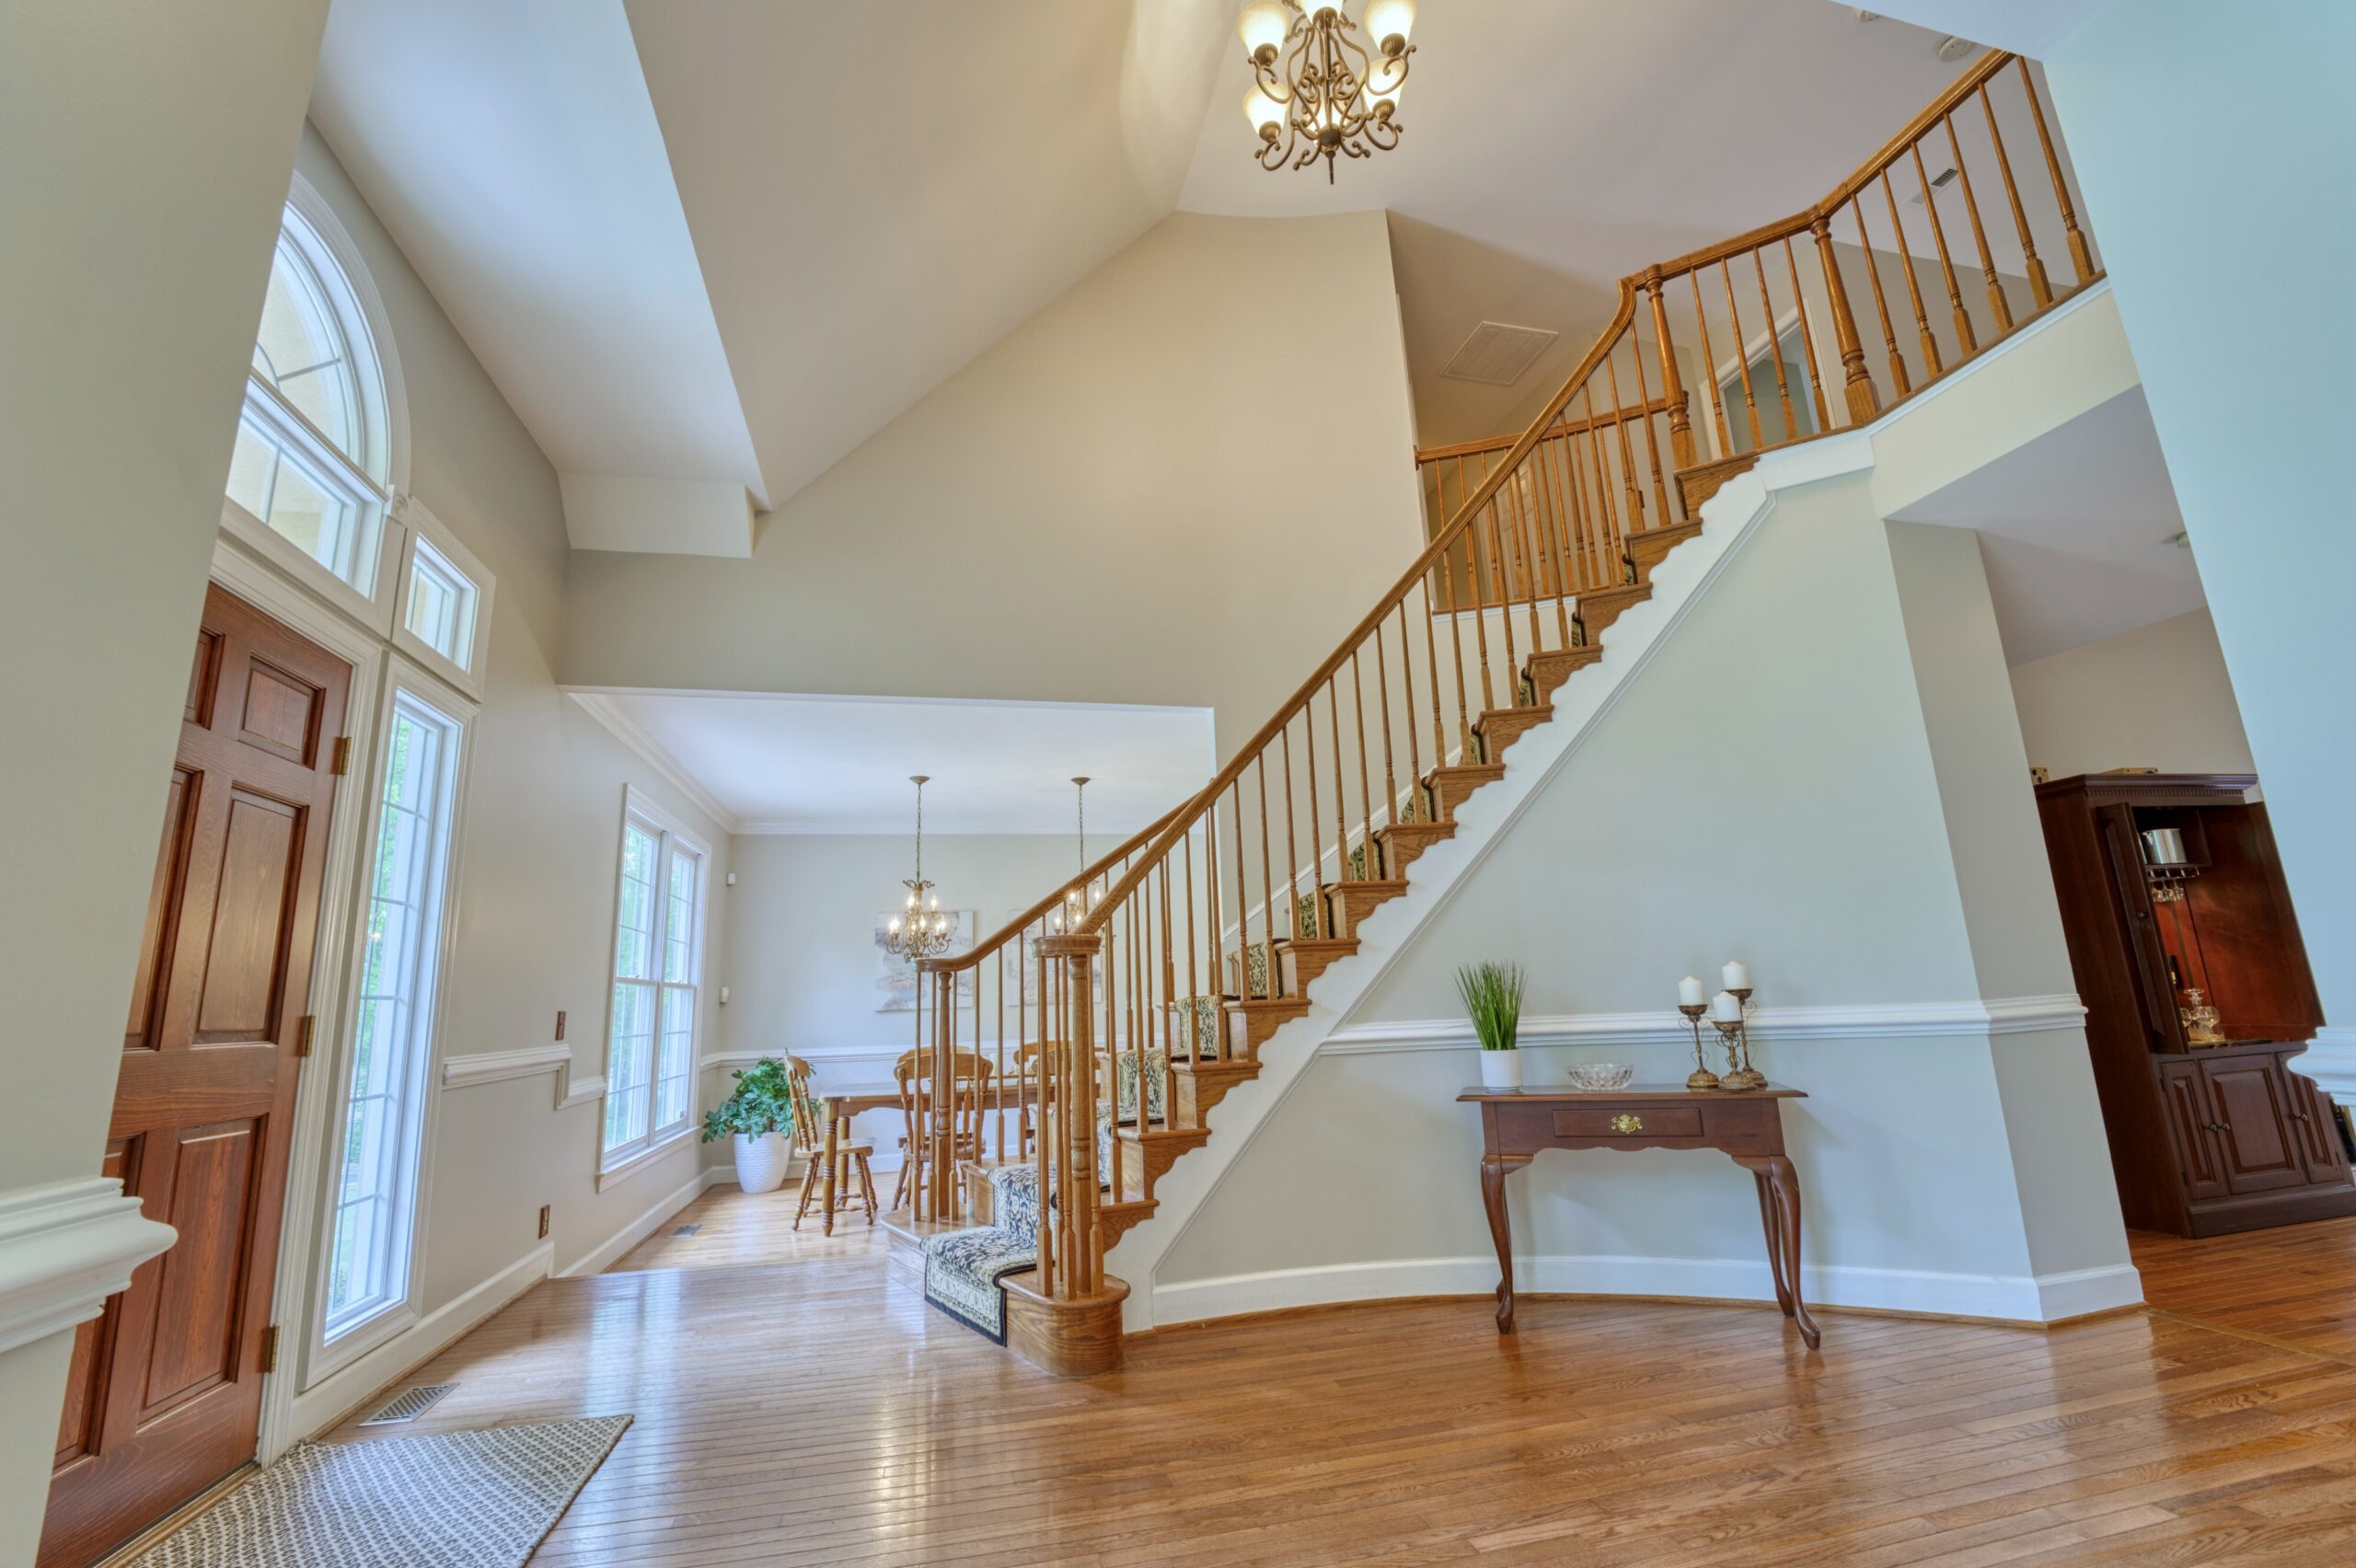 Professional interior photo of 13700 Holly Forest Dr - showing the entry hall with 2-story vaulted ceiling, hardwood floors and a curving staircase to the upstairs catwalk.